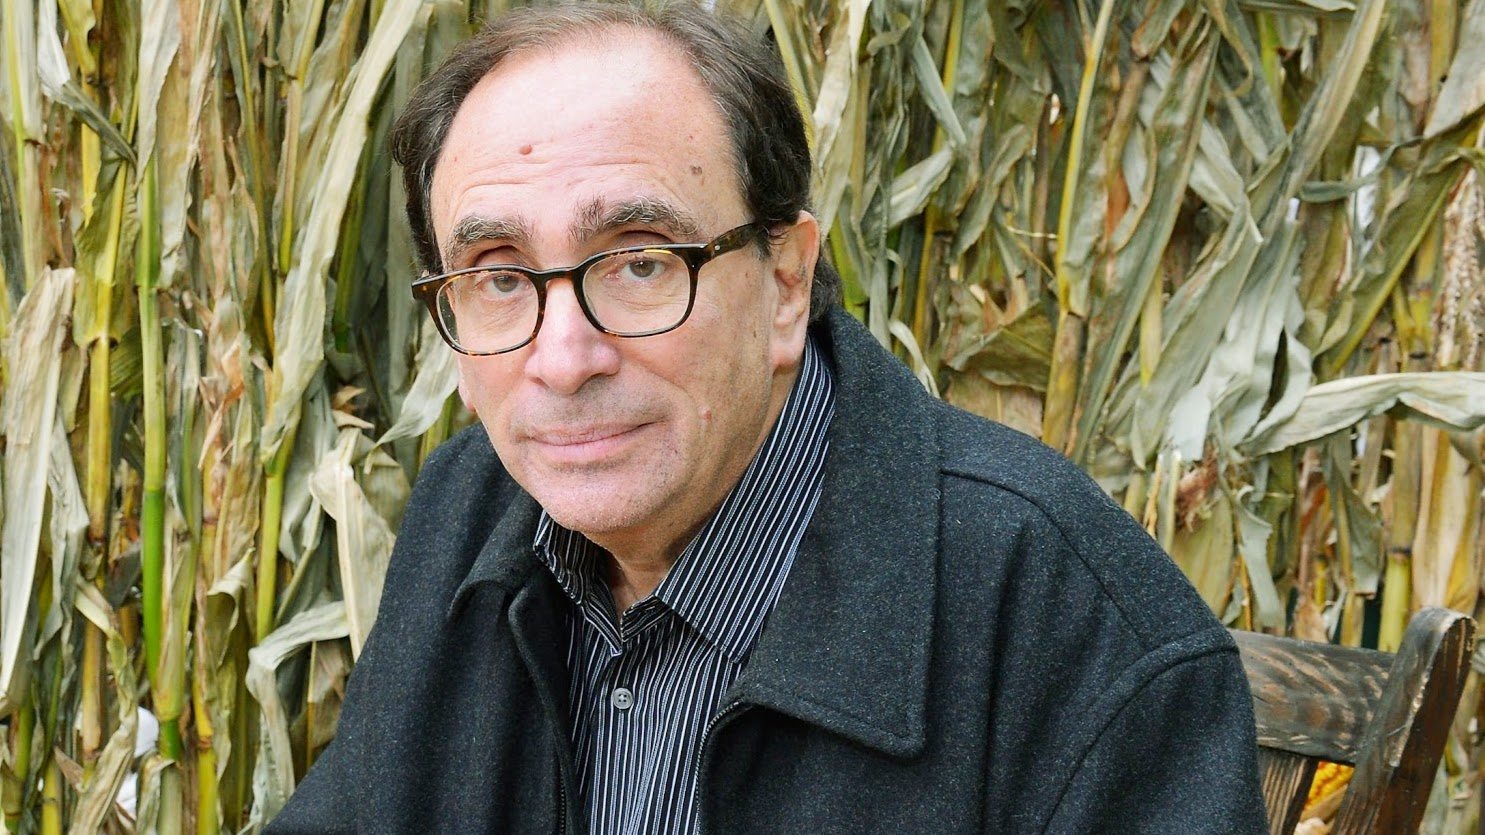 NEW YORK, NY - OCTOBER 25: Children's author R. L. Stine attends Get Goosebumps! Scholastic 20th Anniversary Celebration at Intrepid Sea-Air-Space Museum on October 25, 2012 in New York City. (Photo by Slaven Vlasic/Getty Images)